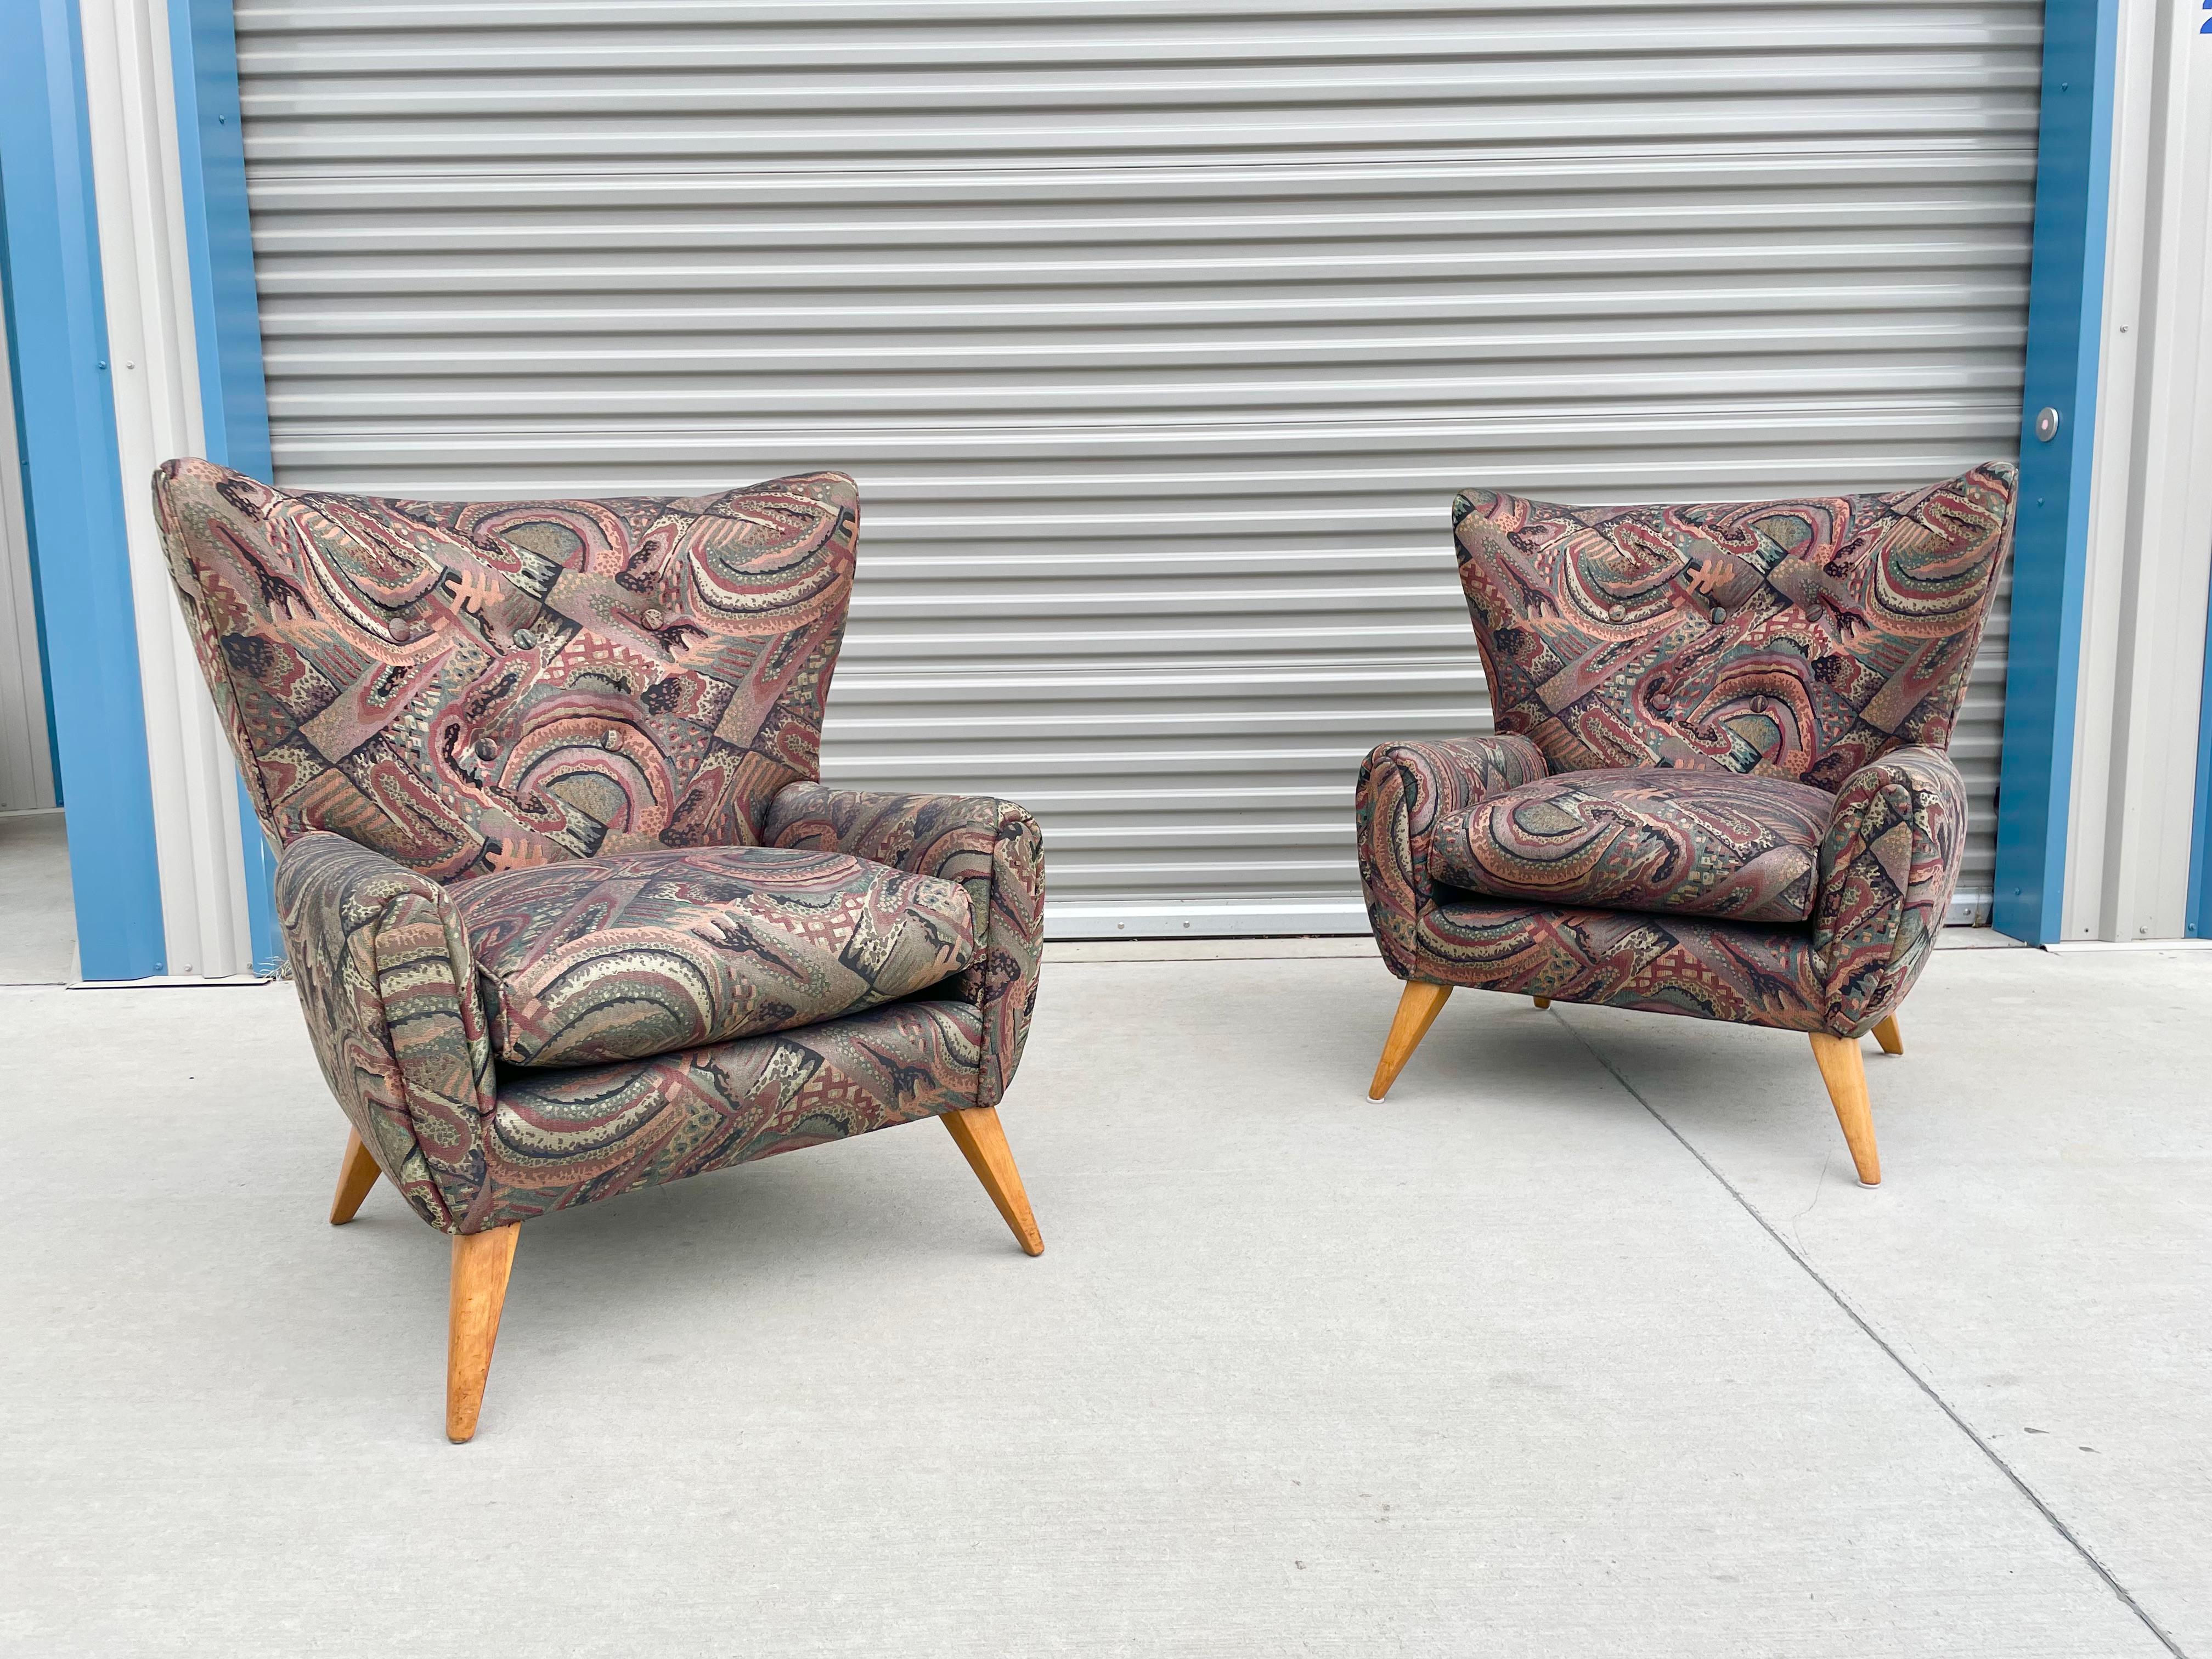 Pair of midcentury wingback lounge chairs designed and manufactured in the United States circa 1960s. These beautiful vintage chairs feature a lovely wingback design that offers excellent lumbar support giving a great comfort experience. The chair